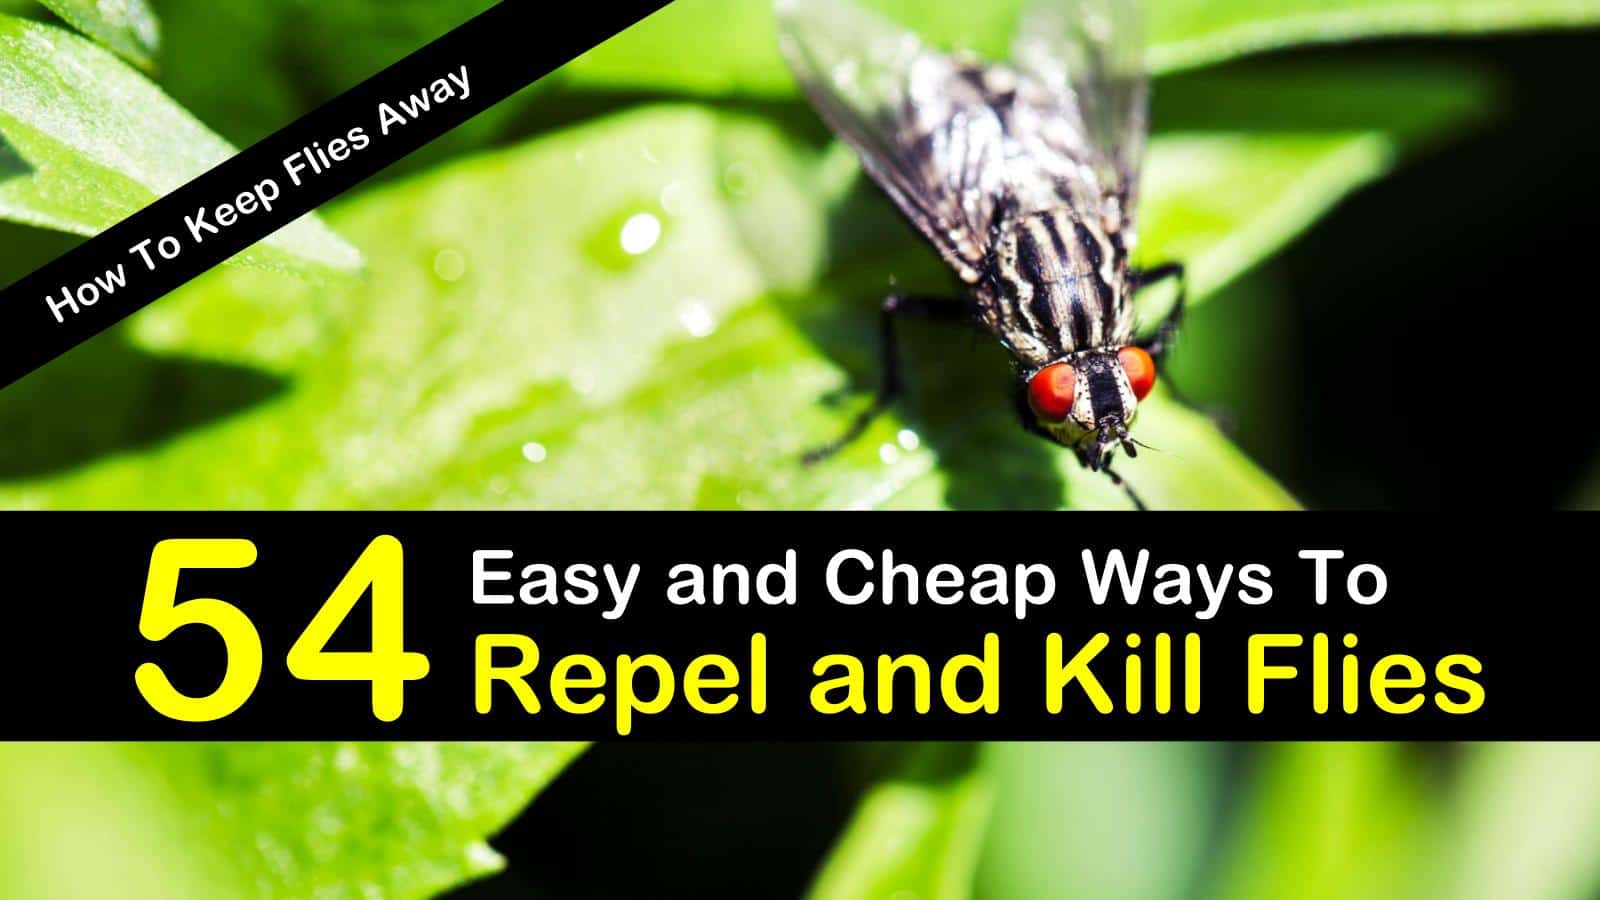 How to Keep Flies Away – 54 Easy and Cheap Ways to Repel and Kill…